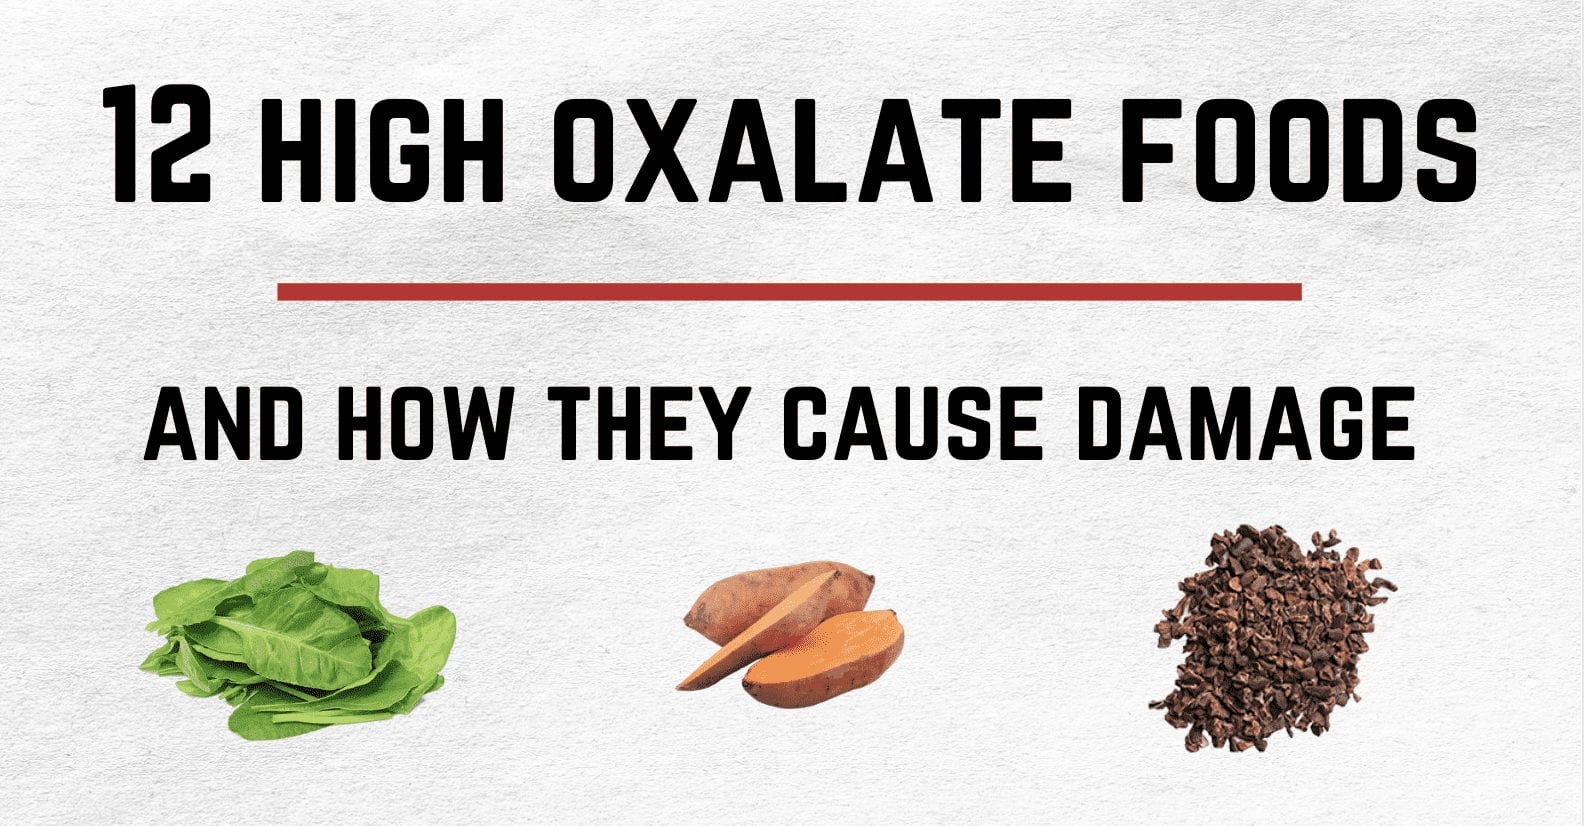 oxalate rich foods